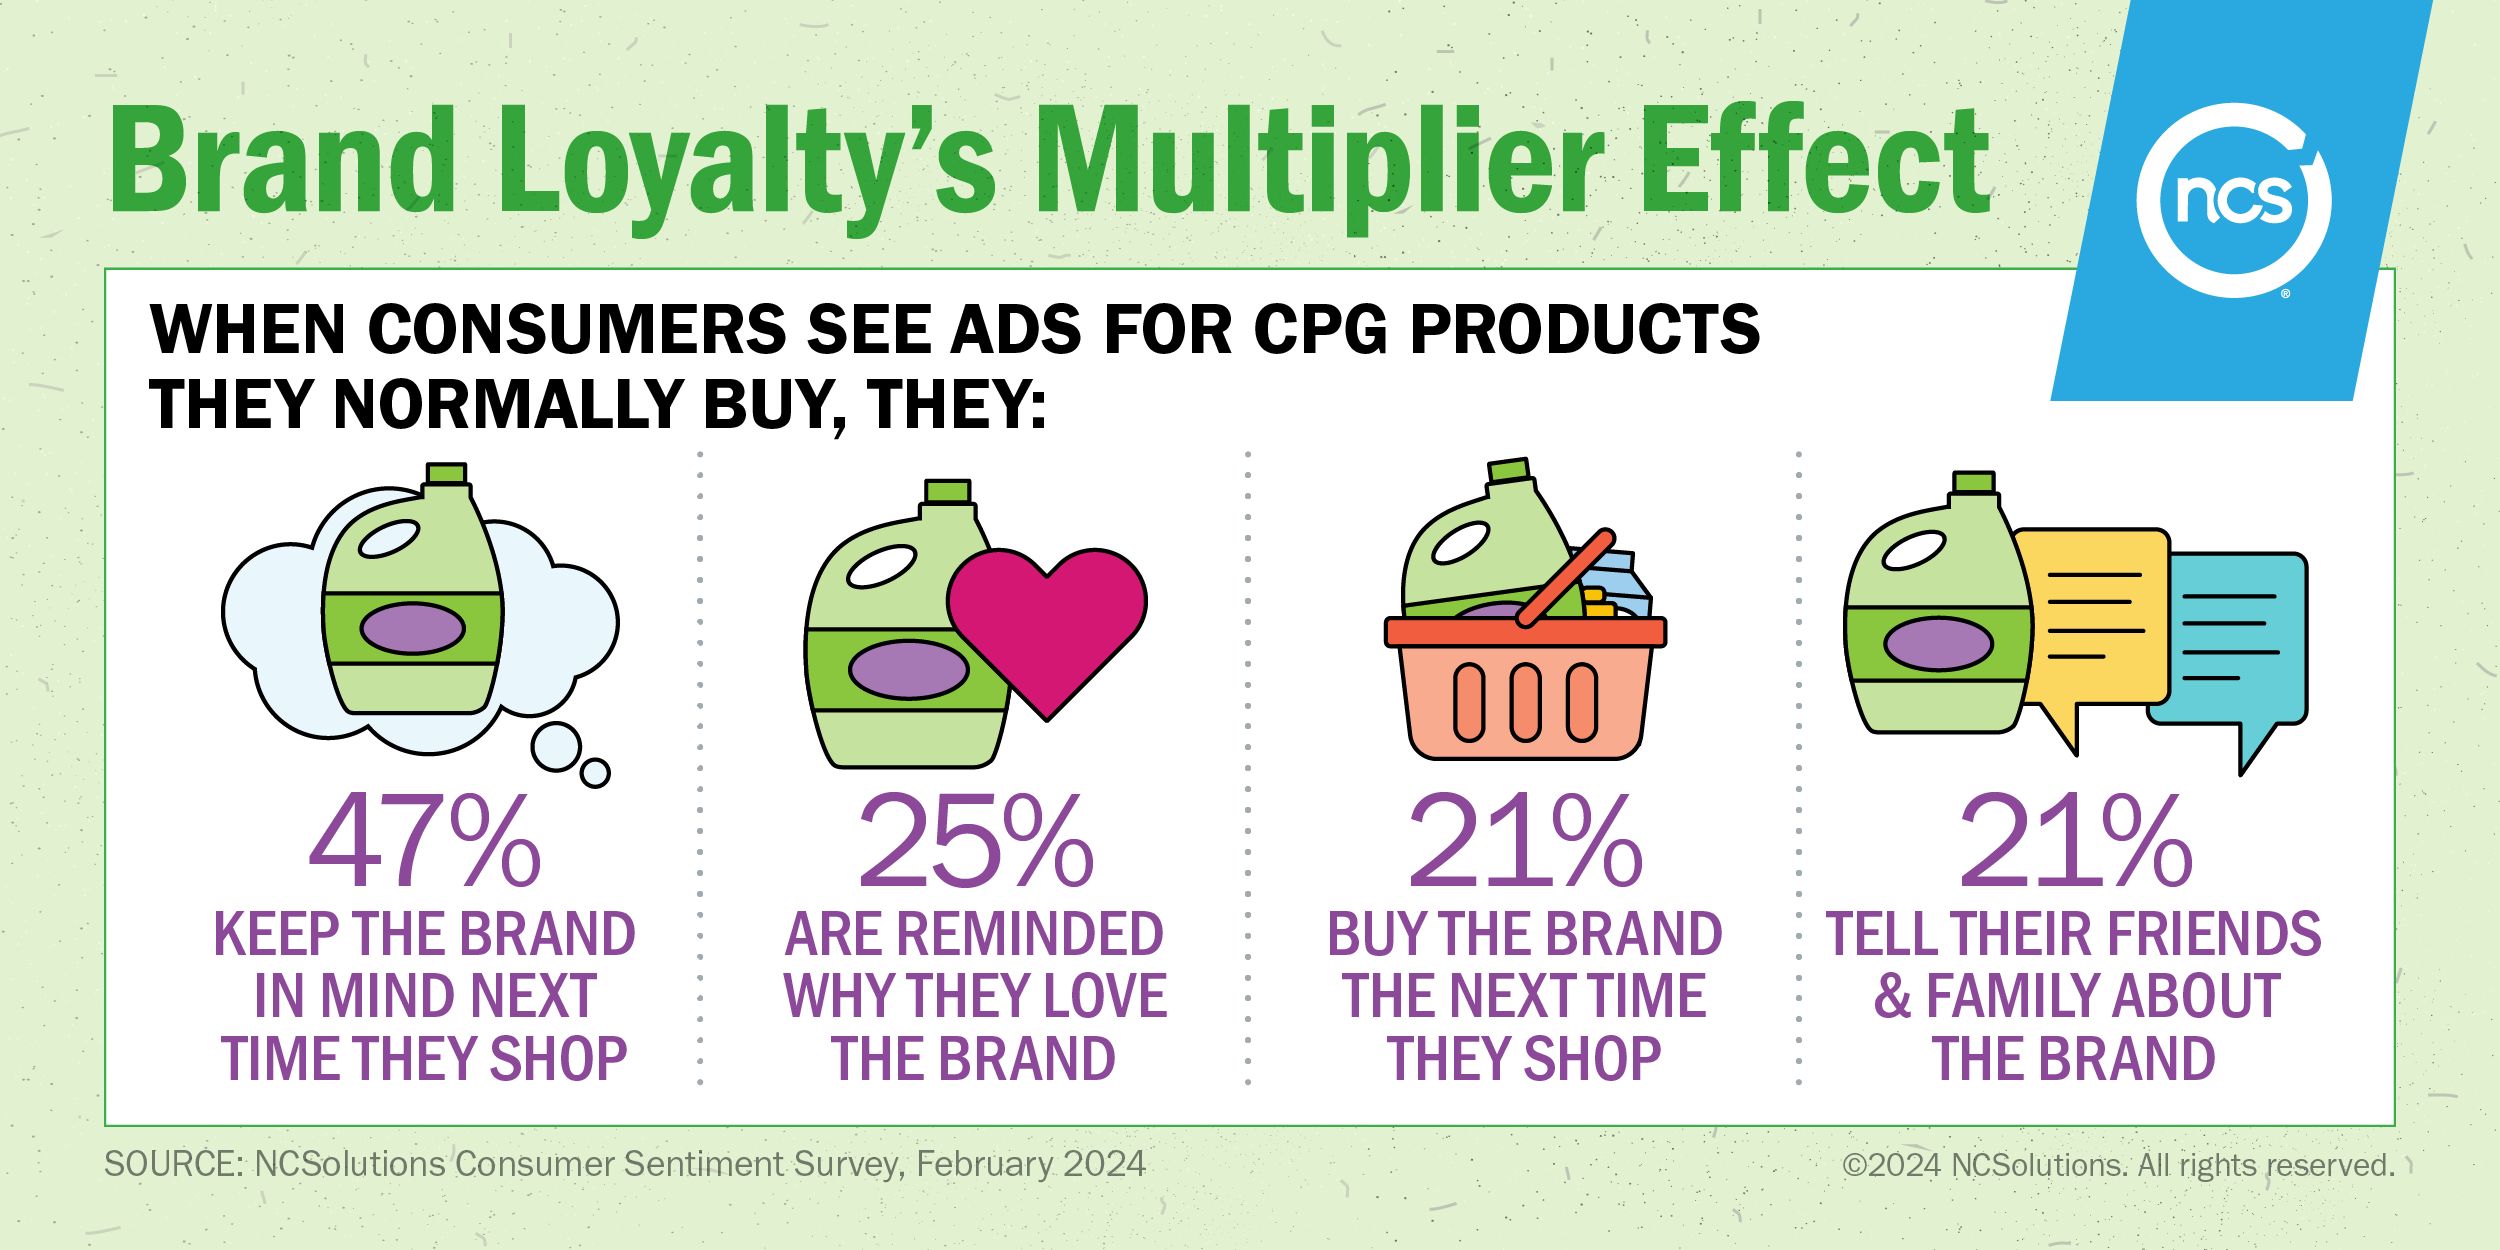 Percentages of brand loyalty's multiplier effect when consumers see ads for CPG products they normally buy.